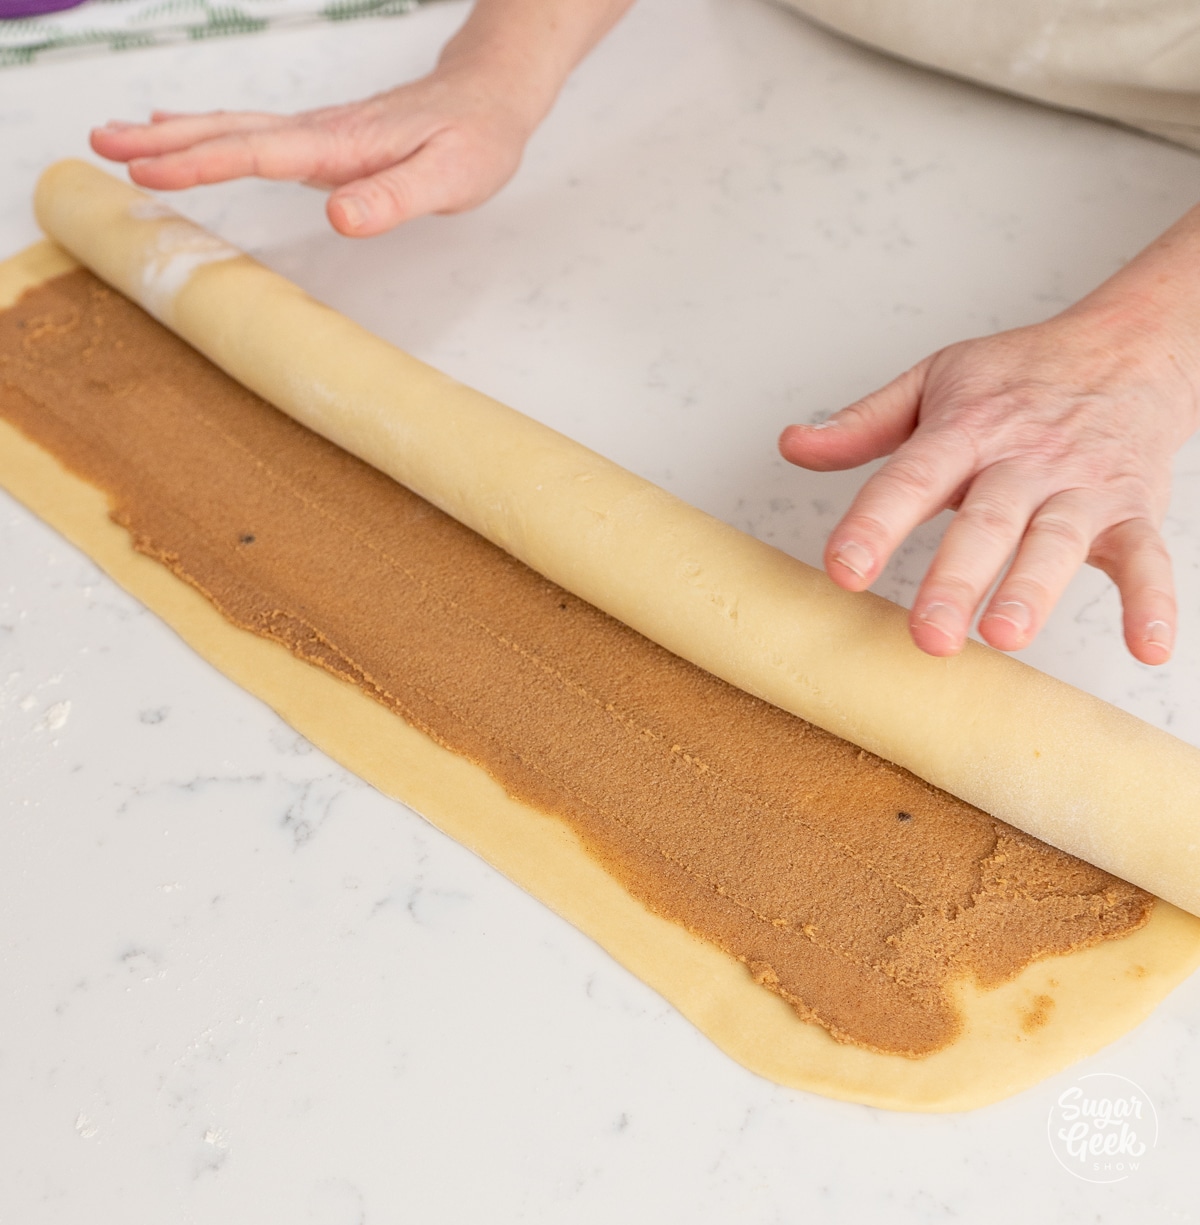 hands rolling dough with cinnamon filling